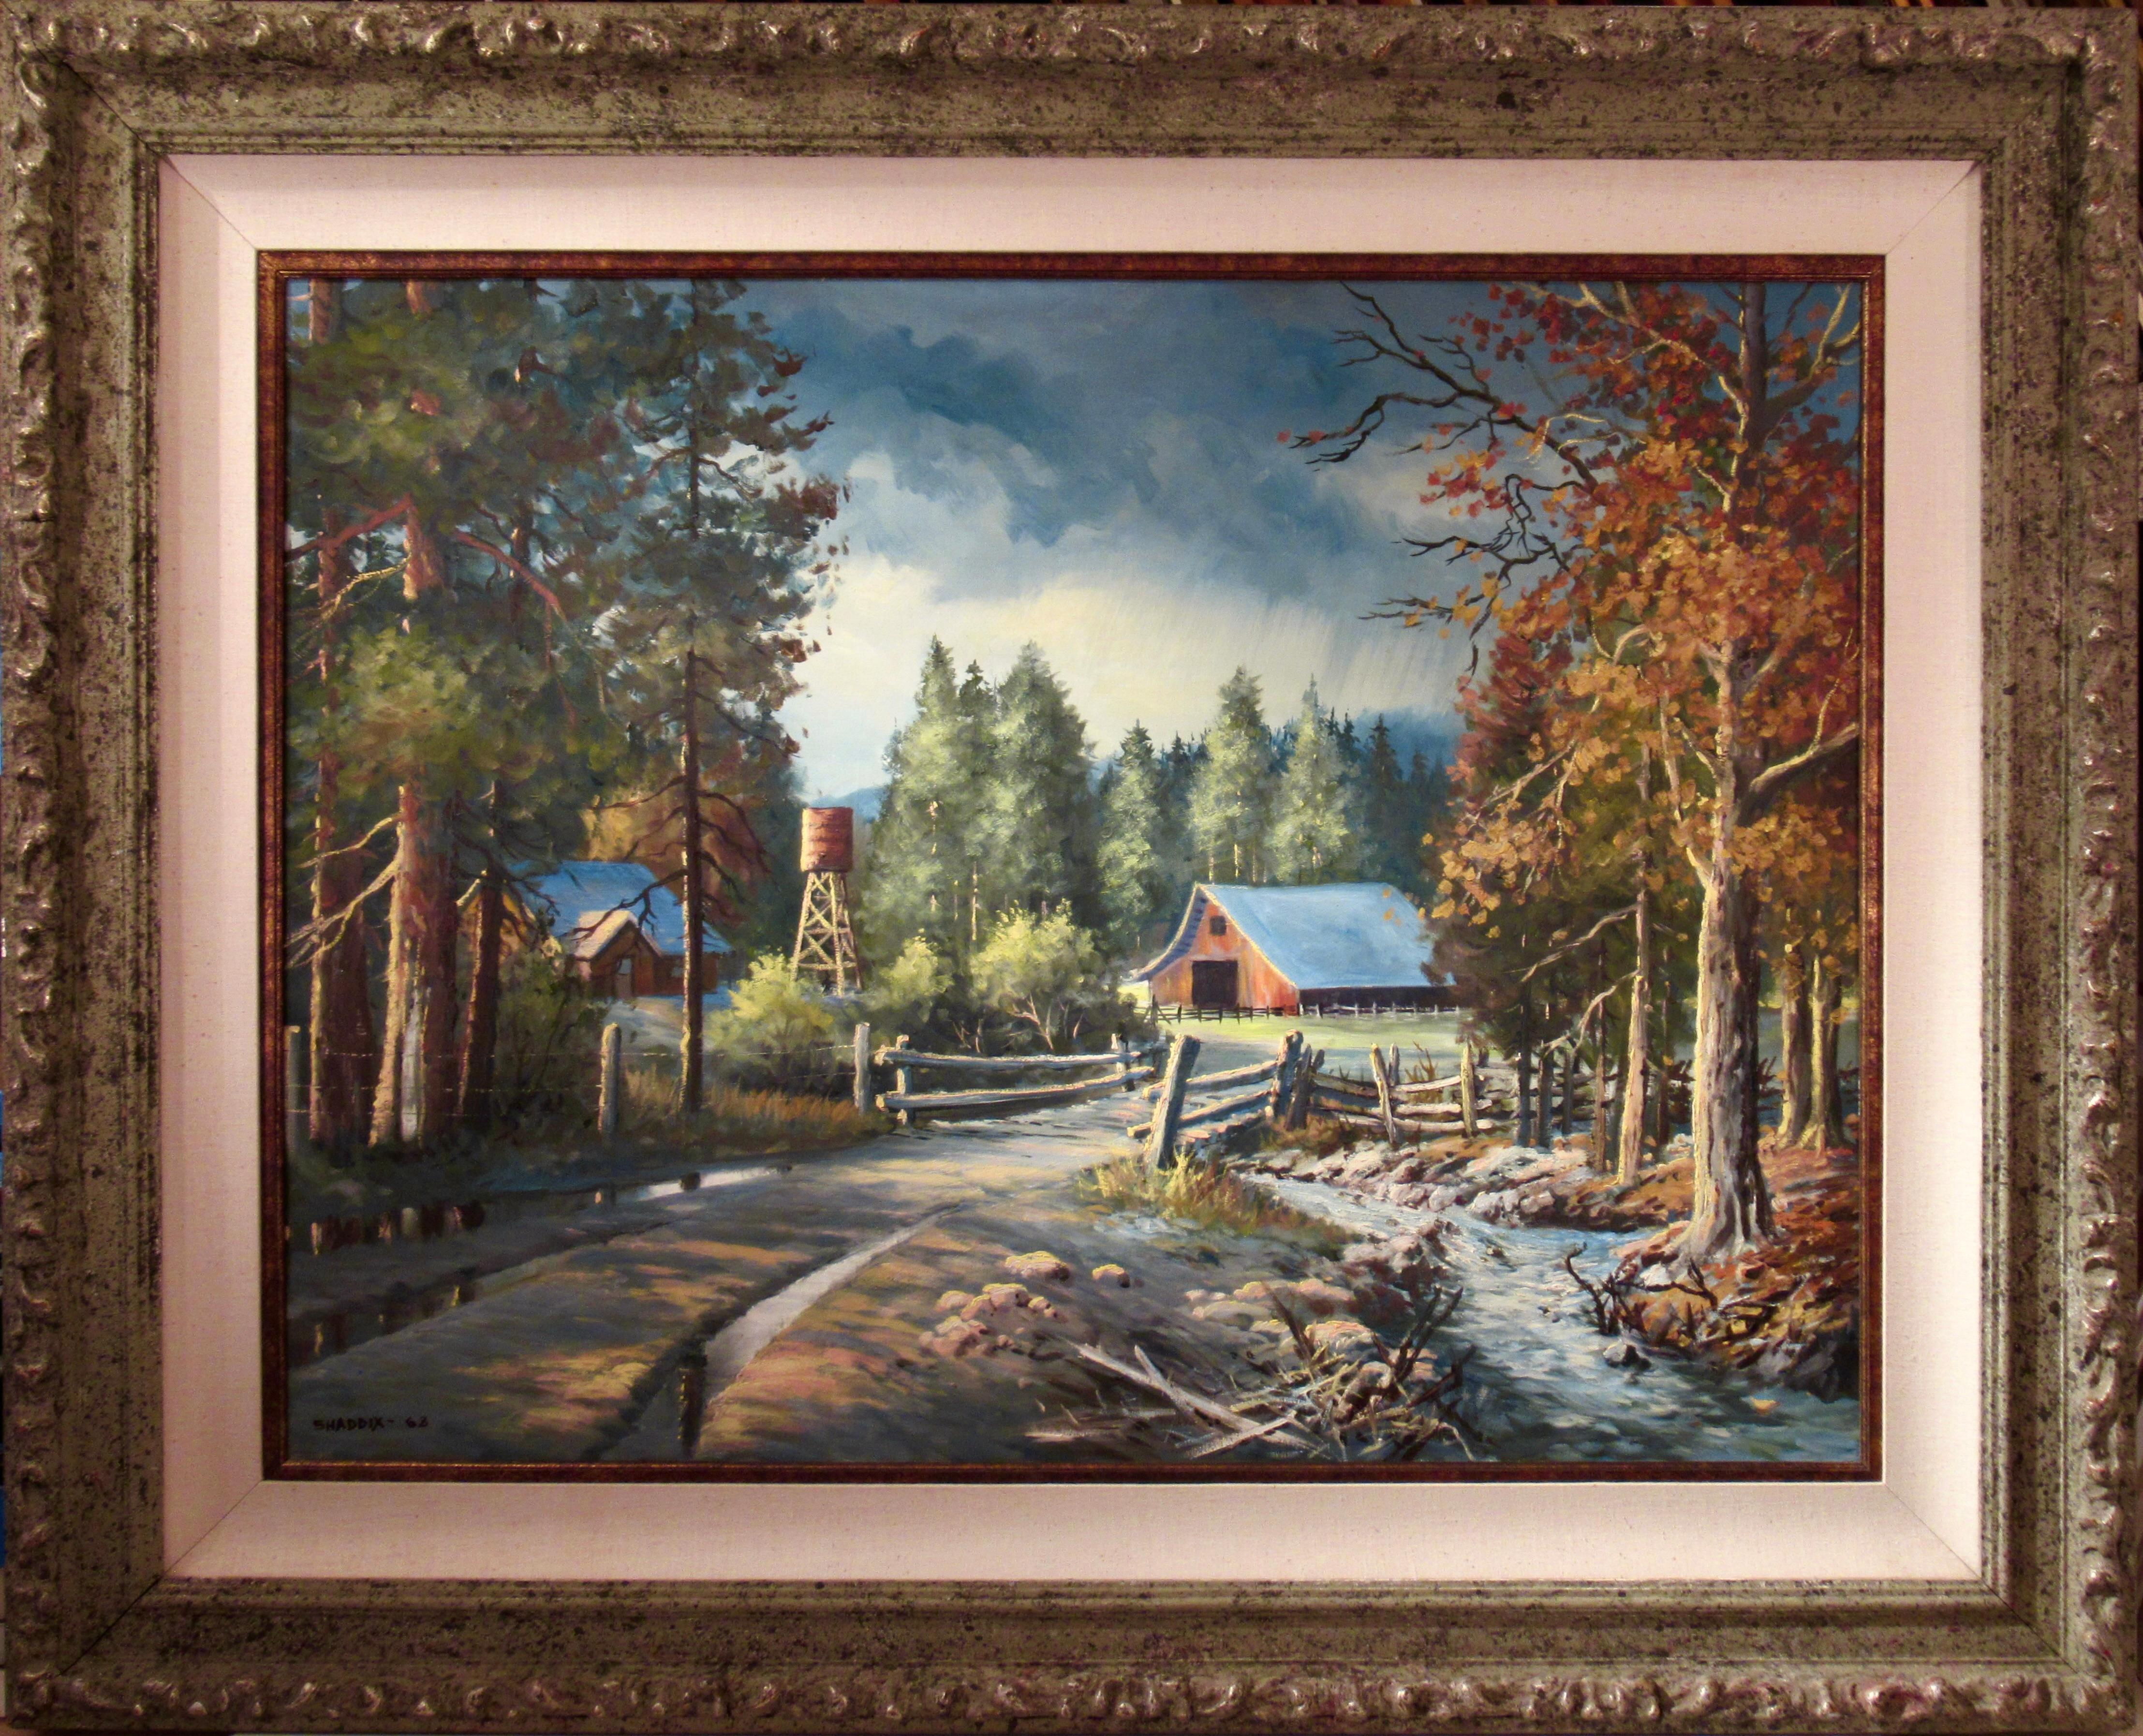 Bill Shaddix Figurative Painting - "Landscape with Barn" large oil painting on canvas